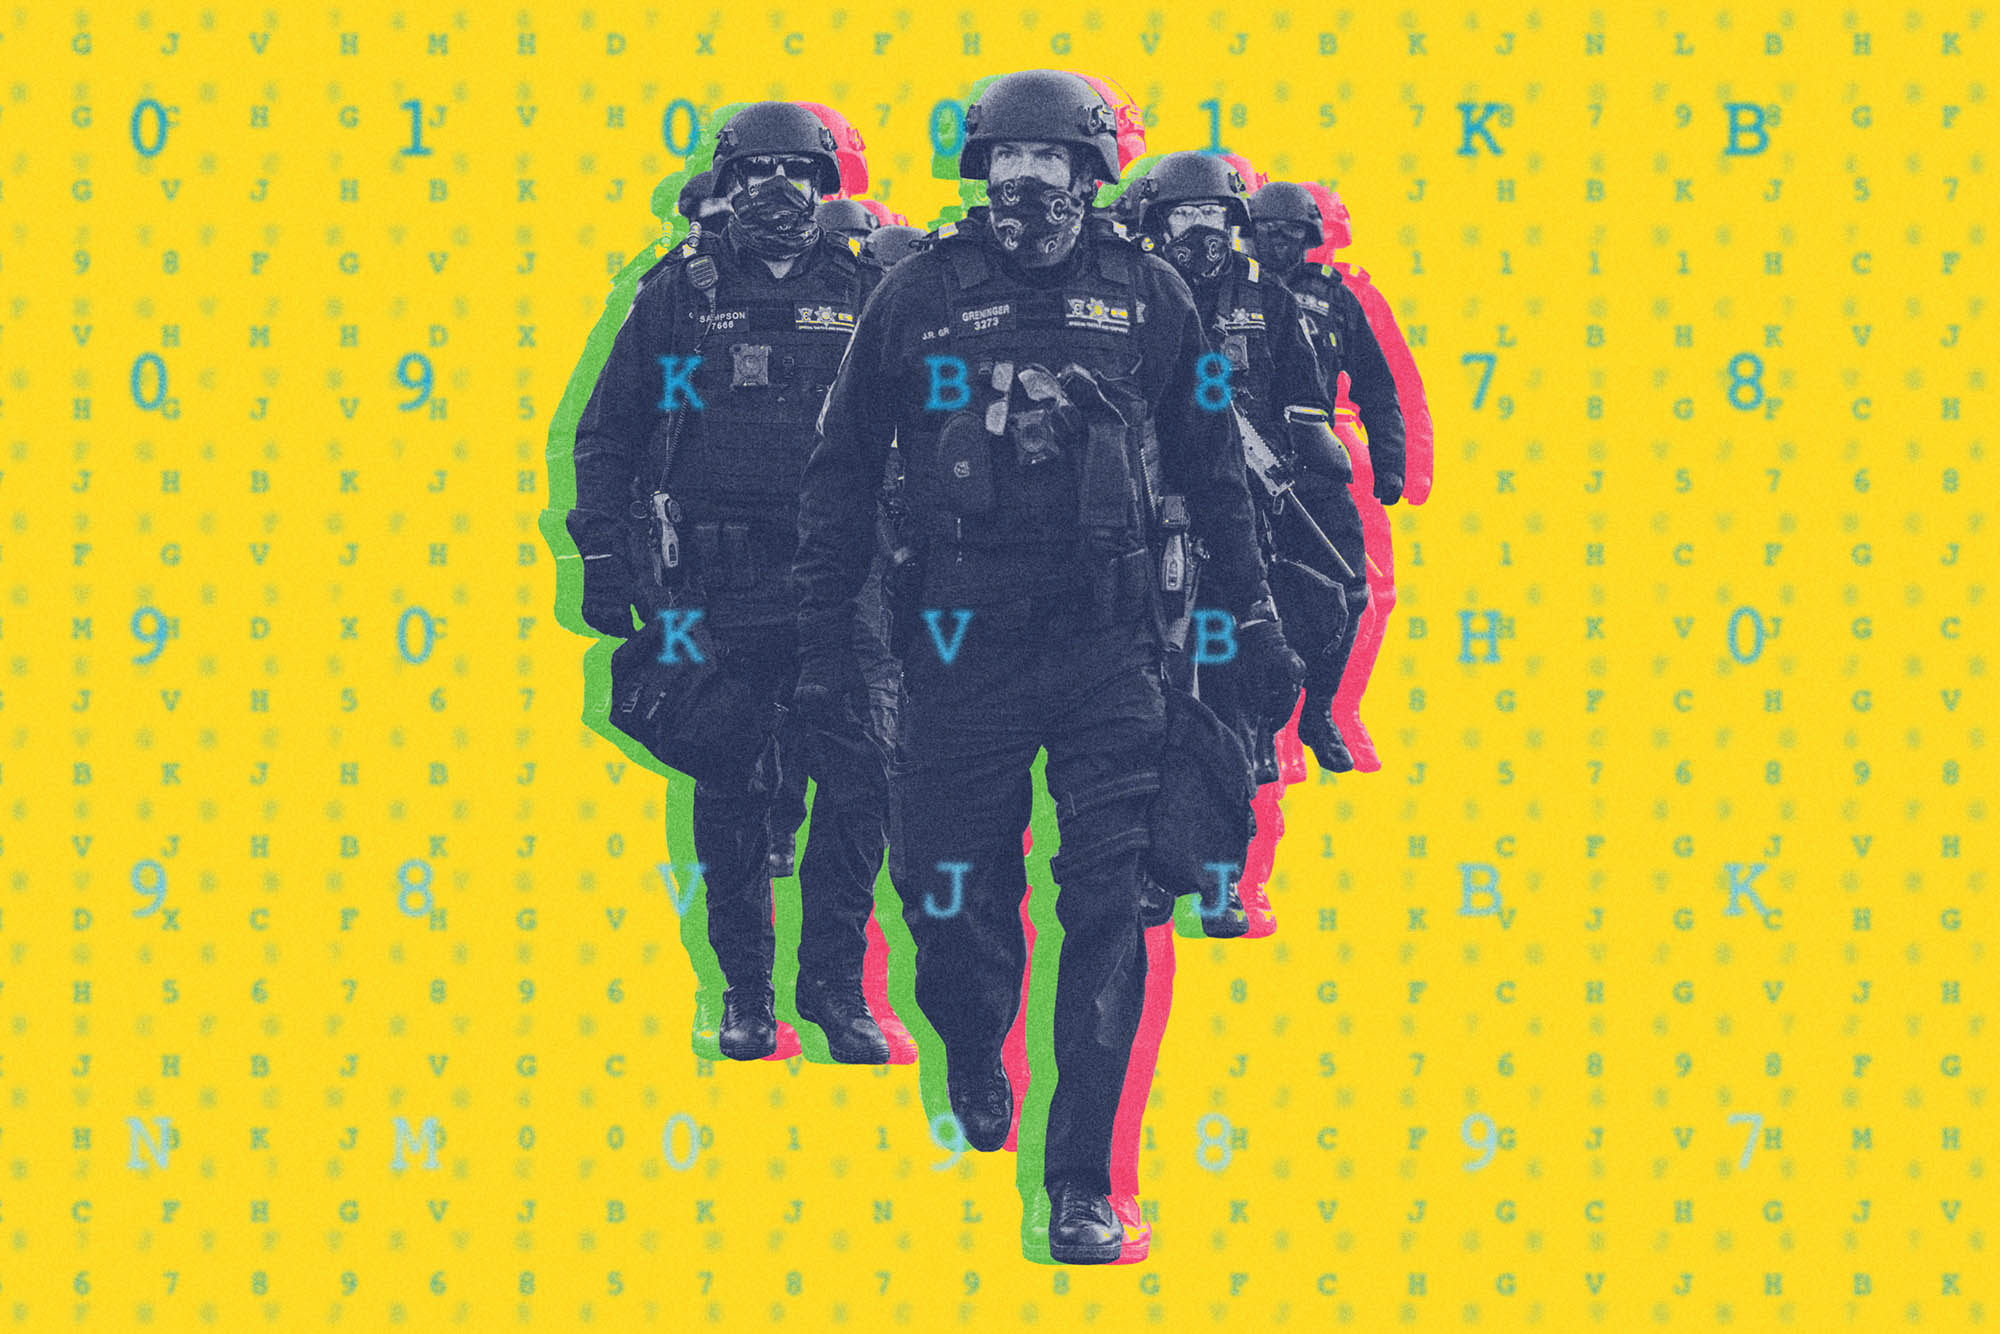 illustration: background is bright yellow with light green random letters and numbers in various sizes with Police in full riot gear in the middle